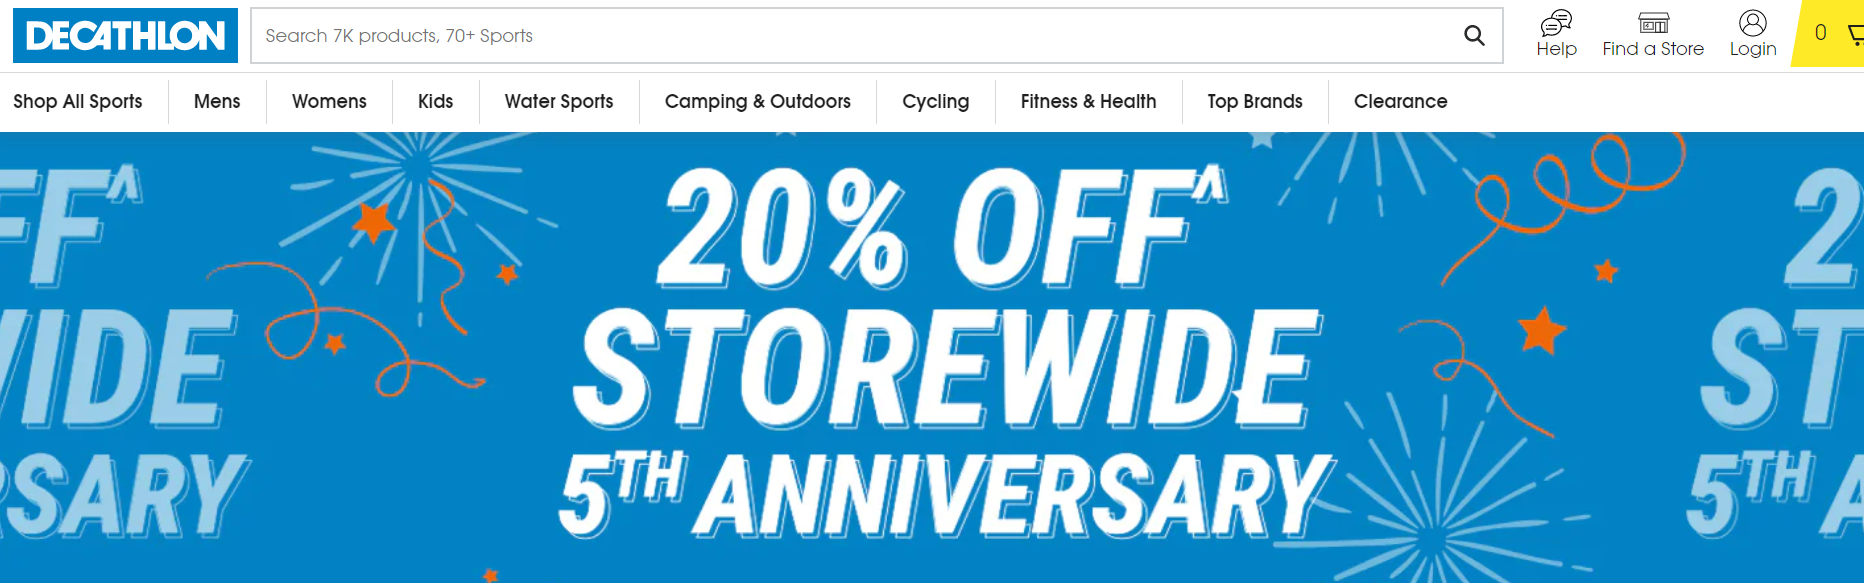 Decathlon - 20% OFF everything, Free shipping $150+